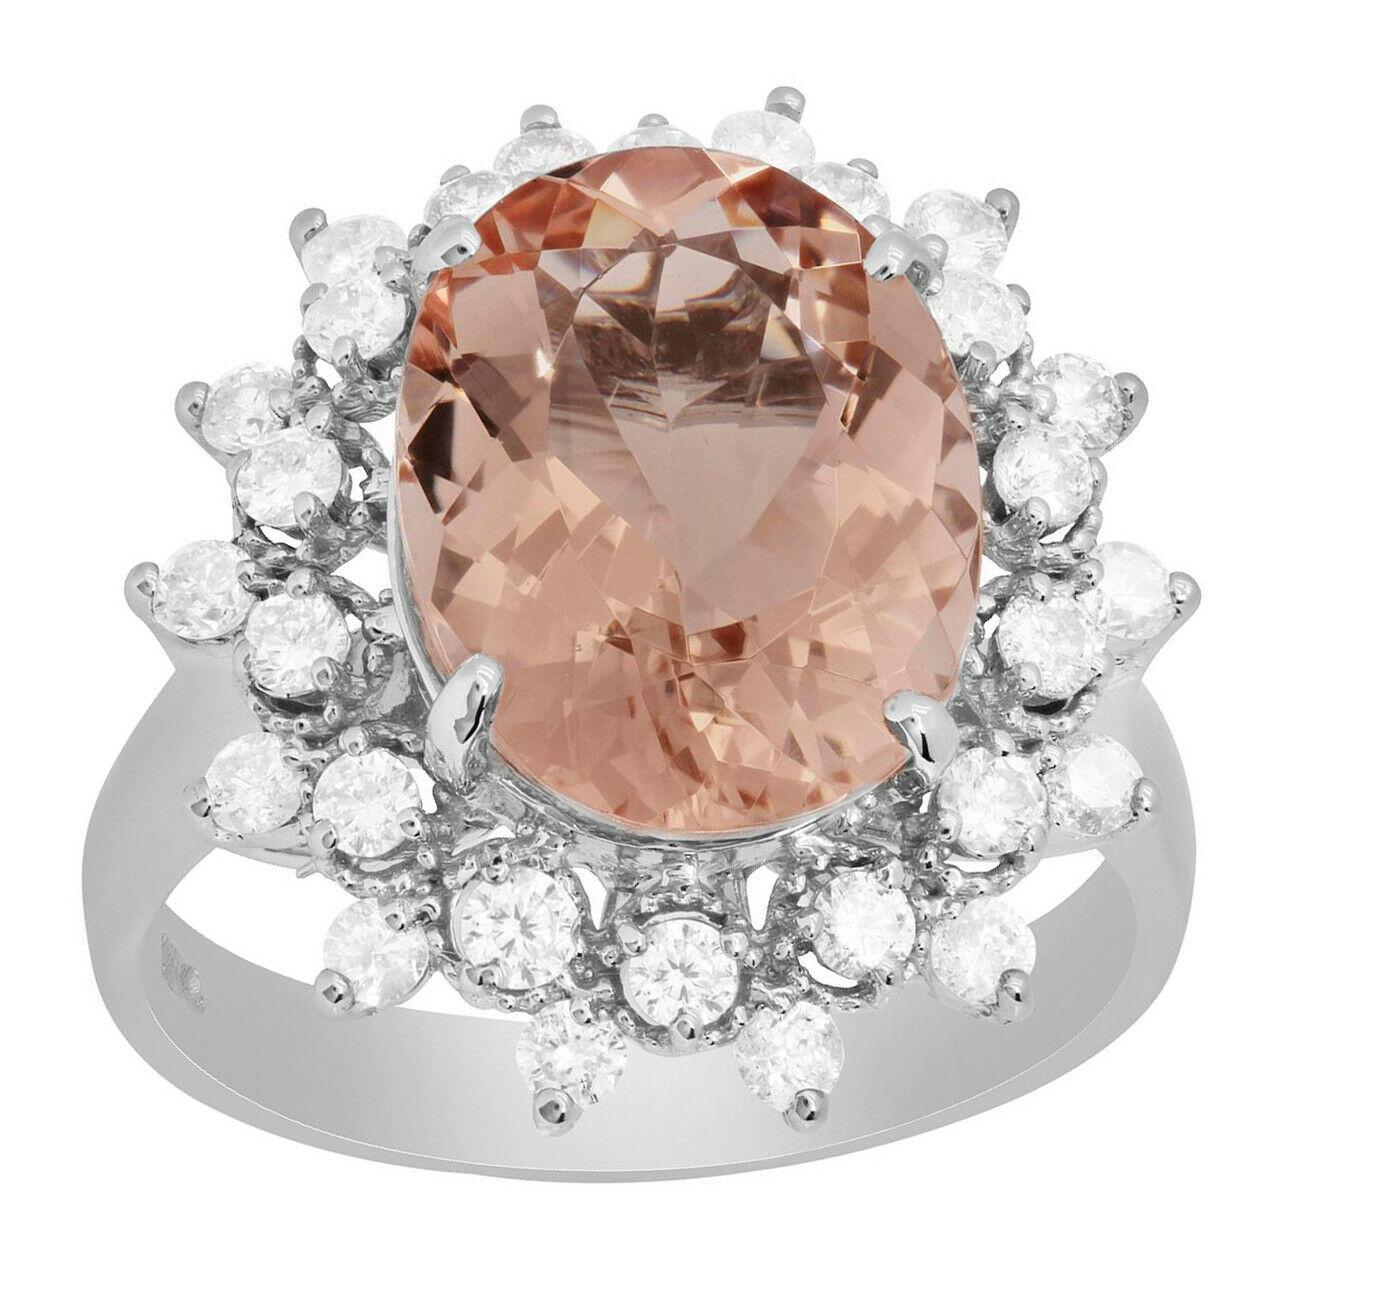 5.20 Carats Exquisite Natural Morganite and Diamond 14K Solid White Gold Ring

Suggested Replacement Value: $4,500.00

Total Natural Oval Shaped Morganite Weights: Approx. 4.50 Carats

Morganite Measures: Approx. 12.00 x 10.00mm

Natural Round